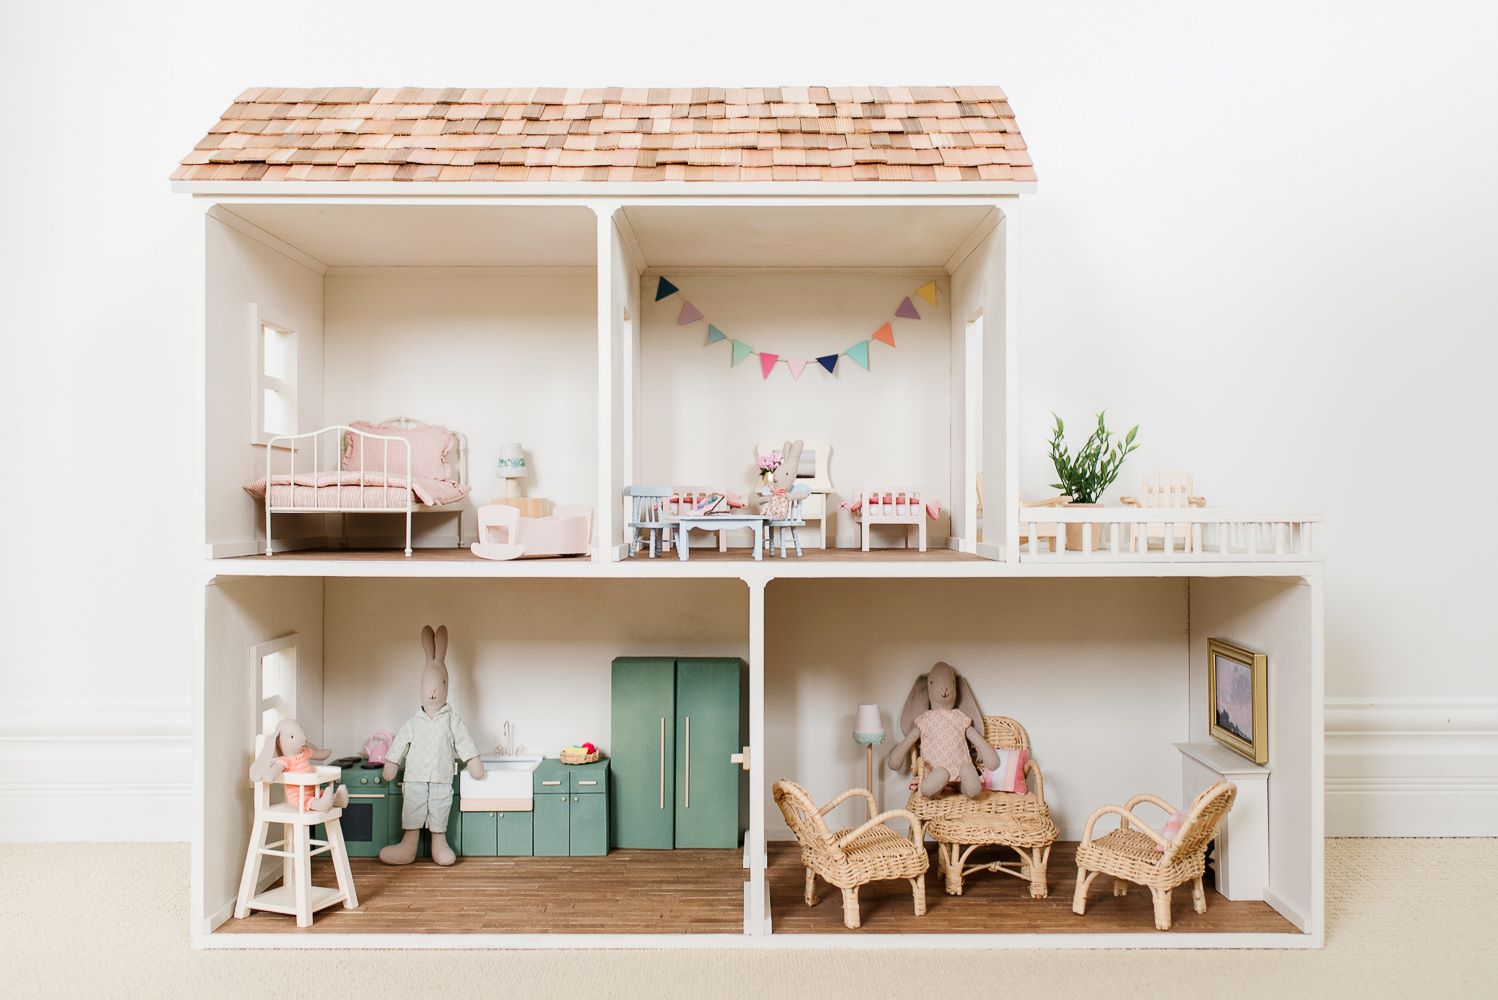 Bunny Bungalow: A Dollhouse For Home Improvement